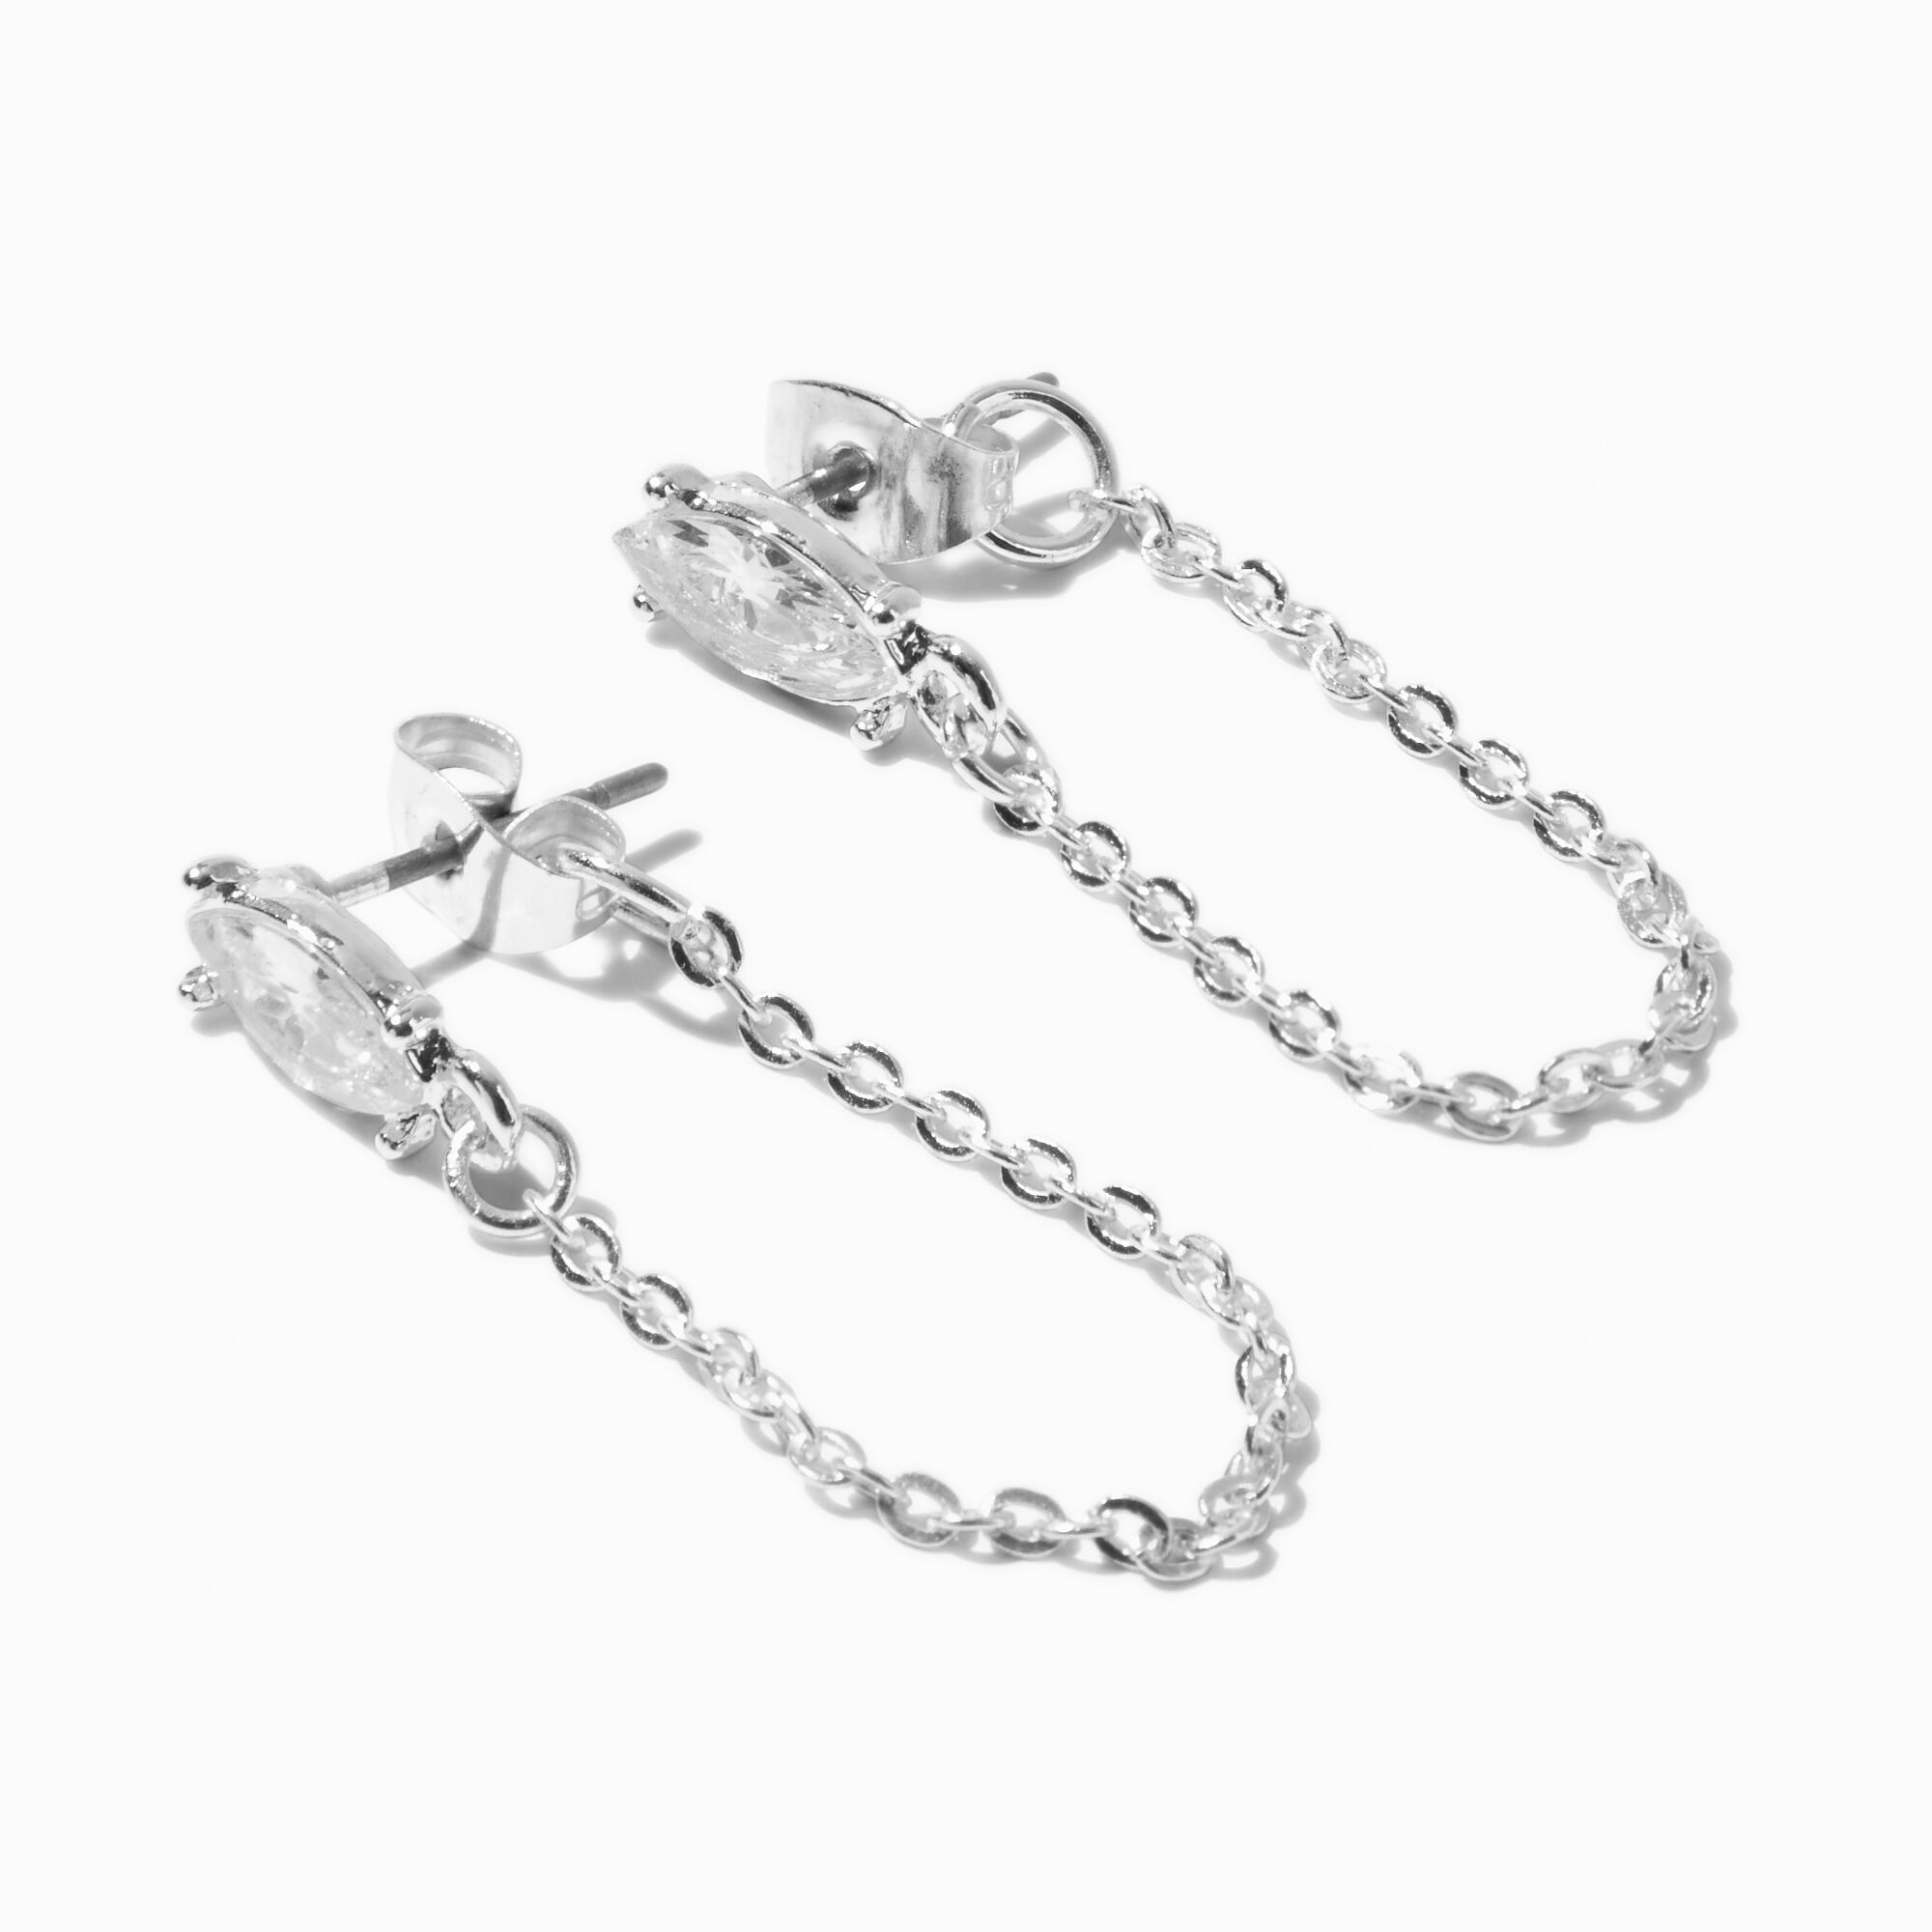 View Claires Teardrop Cubic Zirconia Tone Chain Stud Earrings Silver information